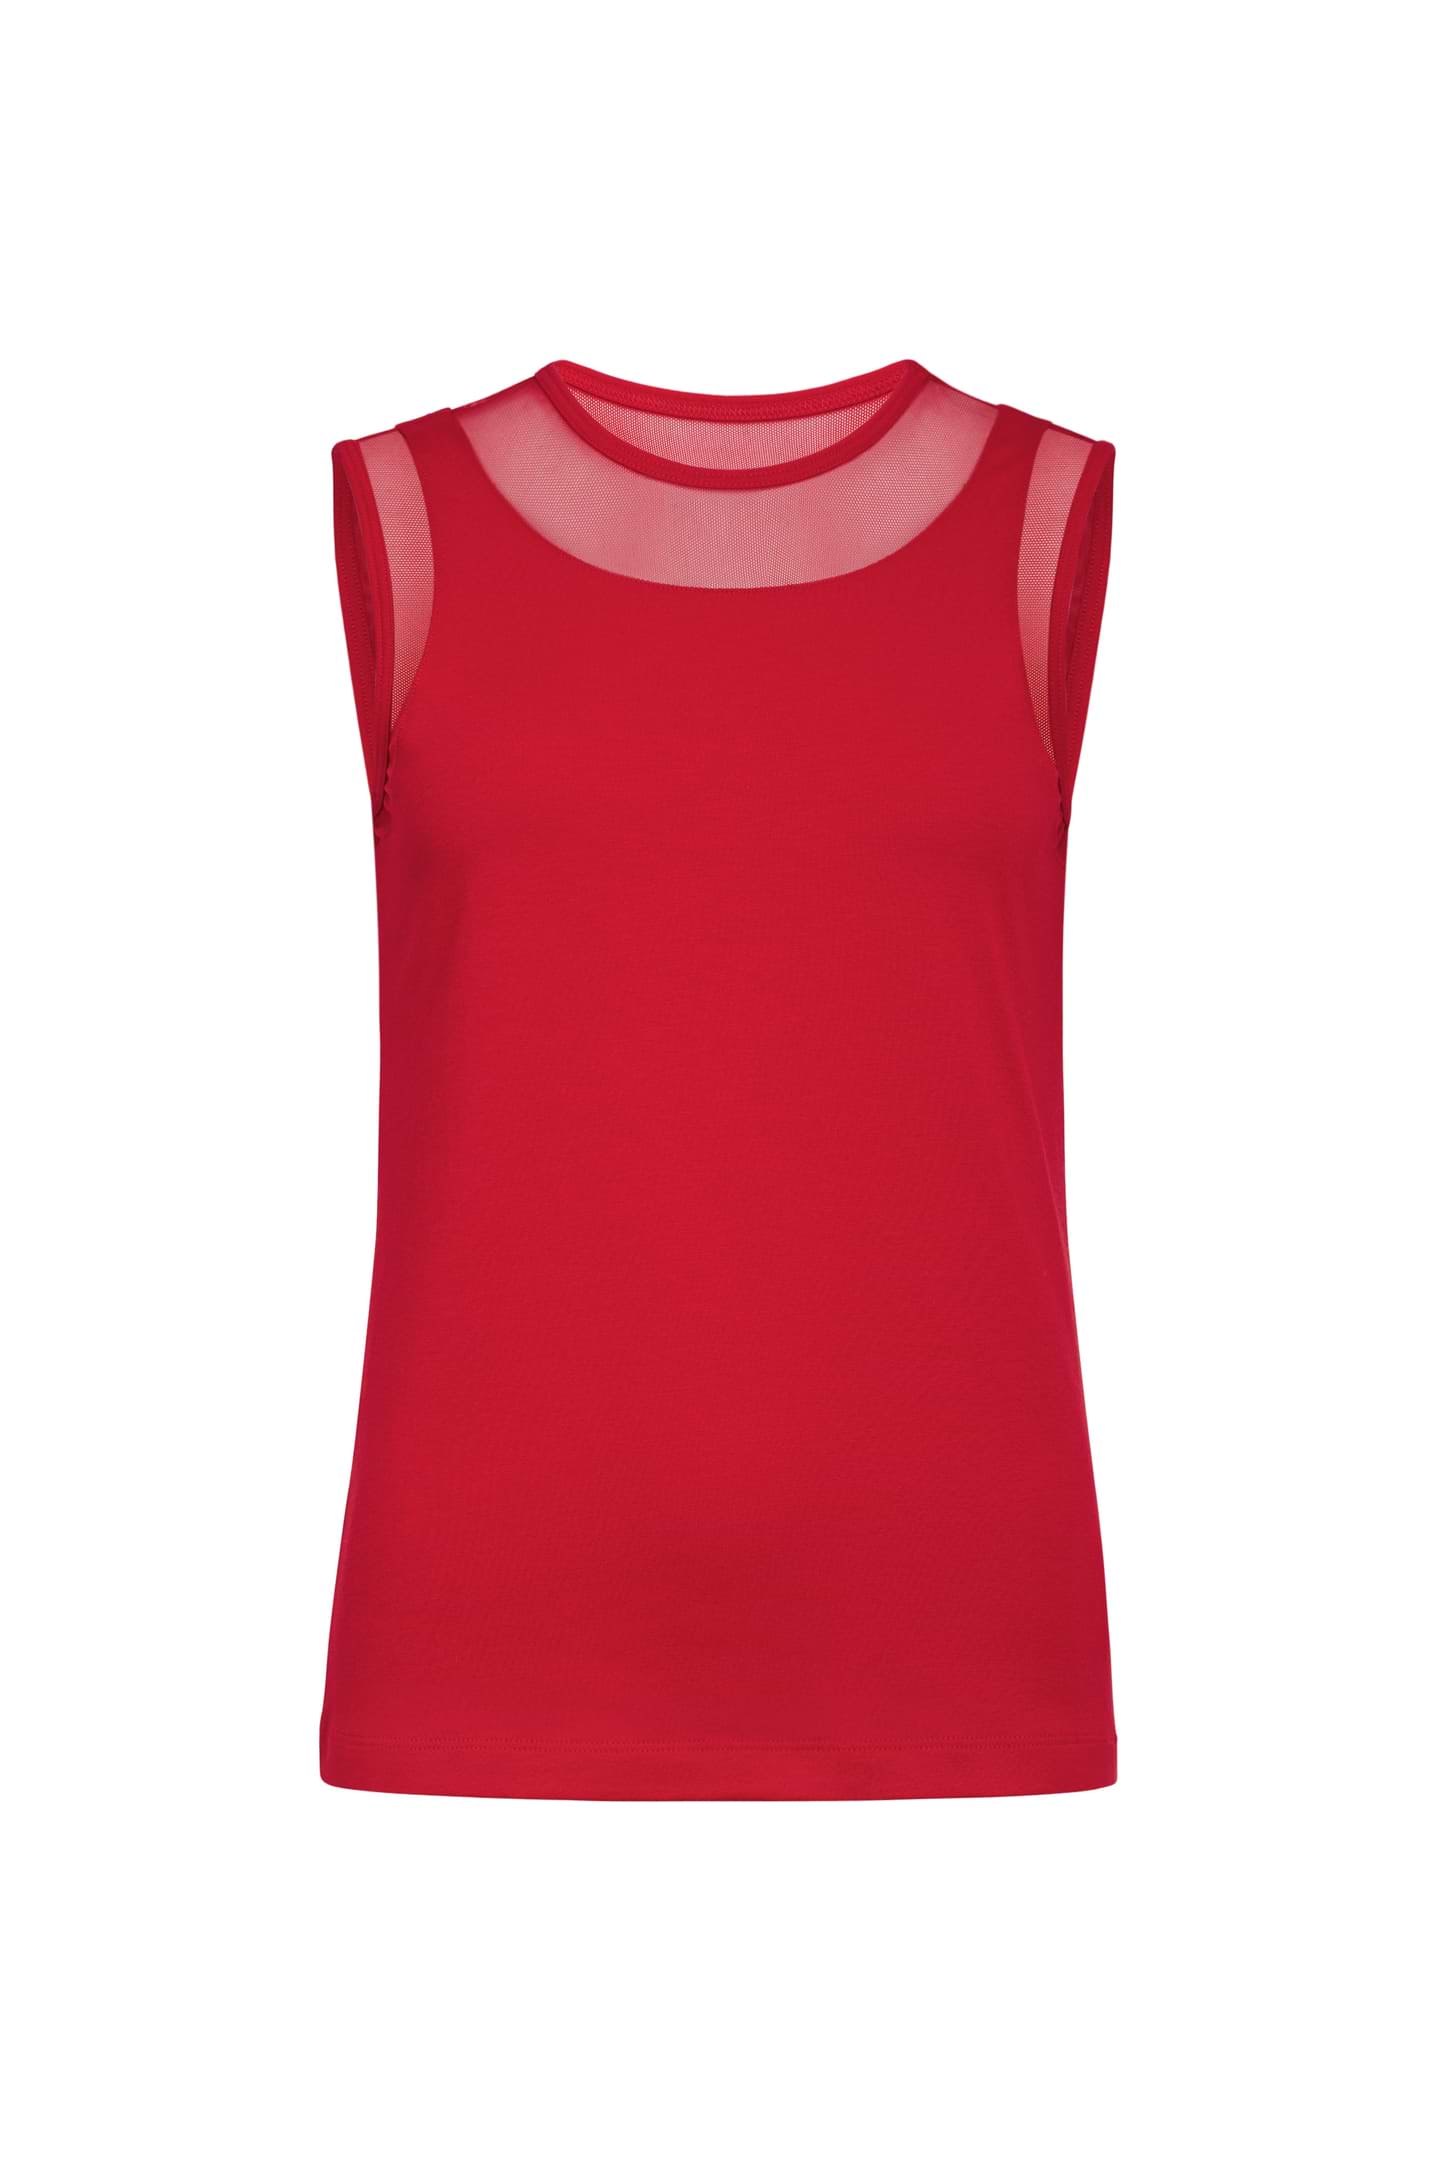 The Best Travel Tank Top. Flat Lay of a Flo Pima Cotton Tank in Atomic Red